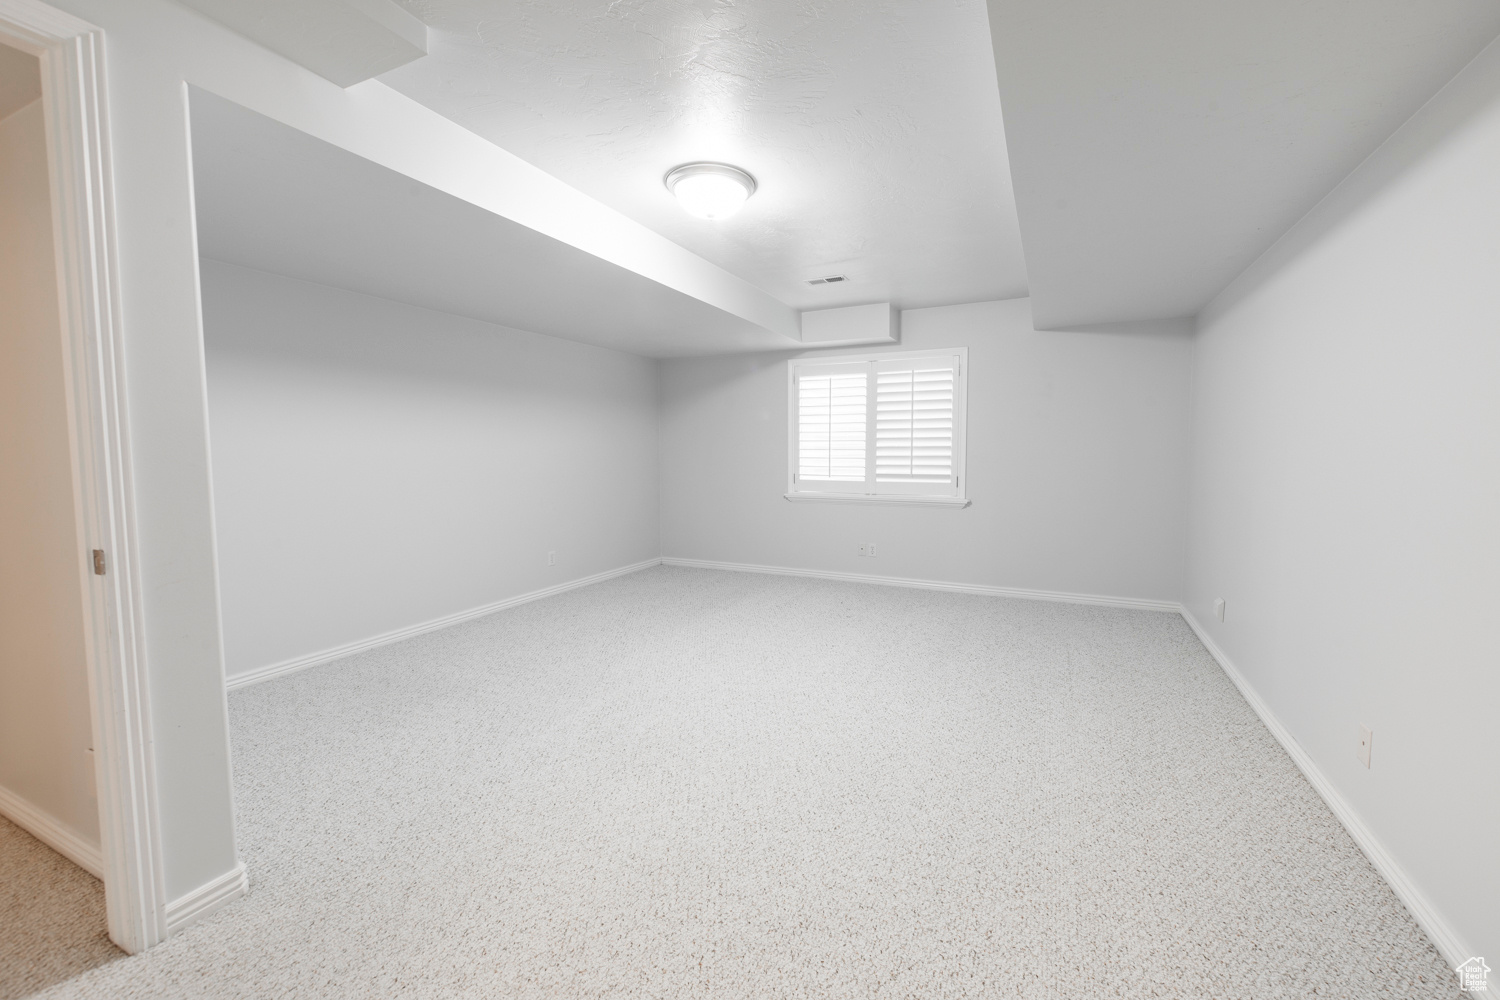 2nd downstairs bedroom with carpet flooring